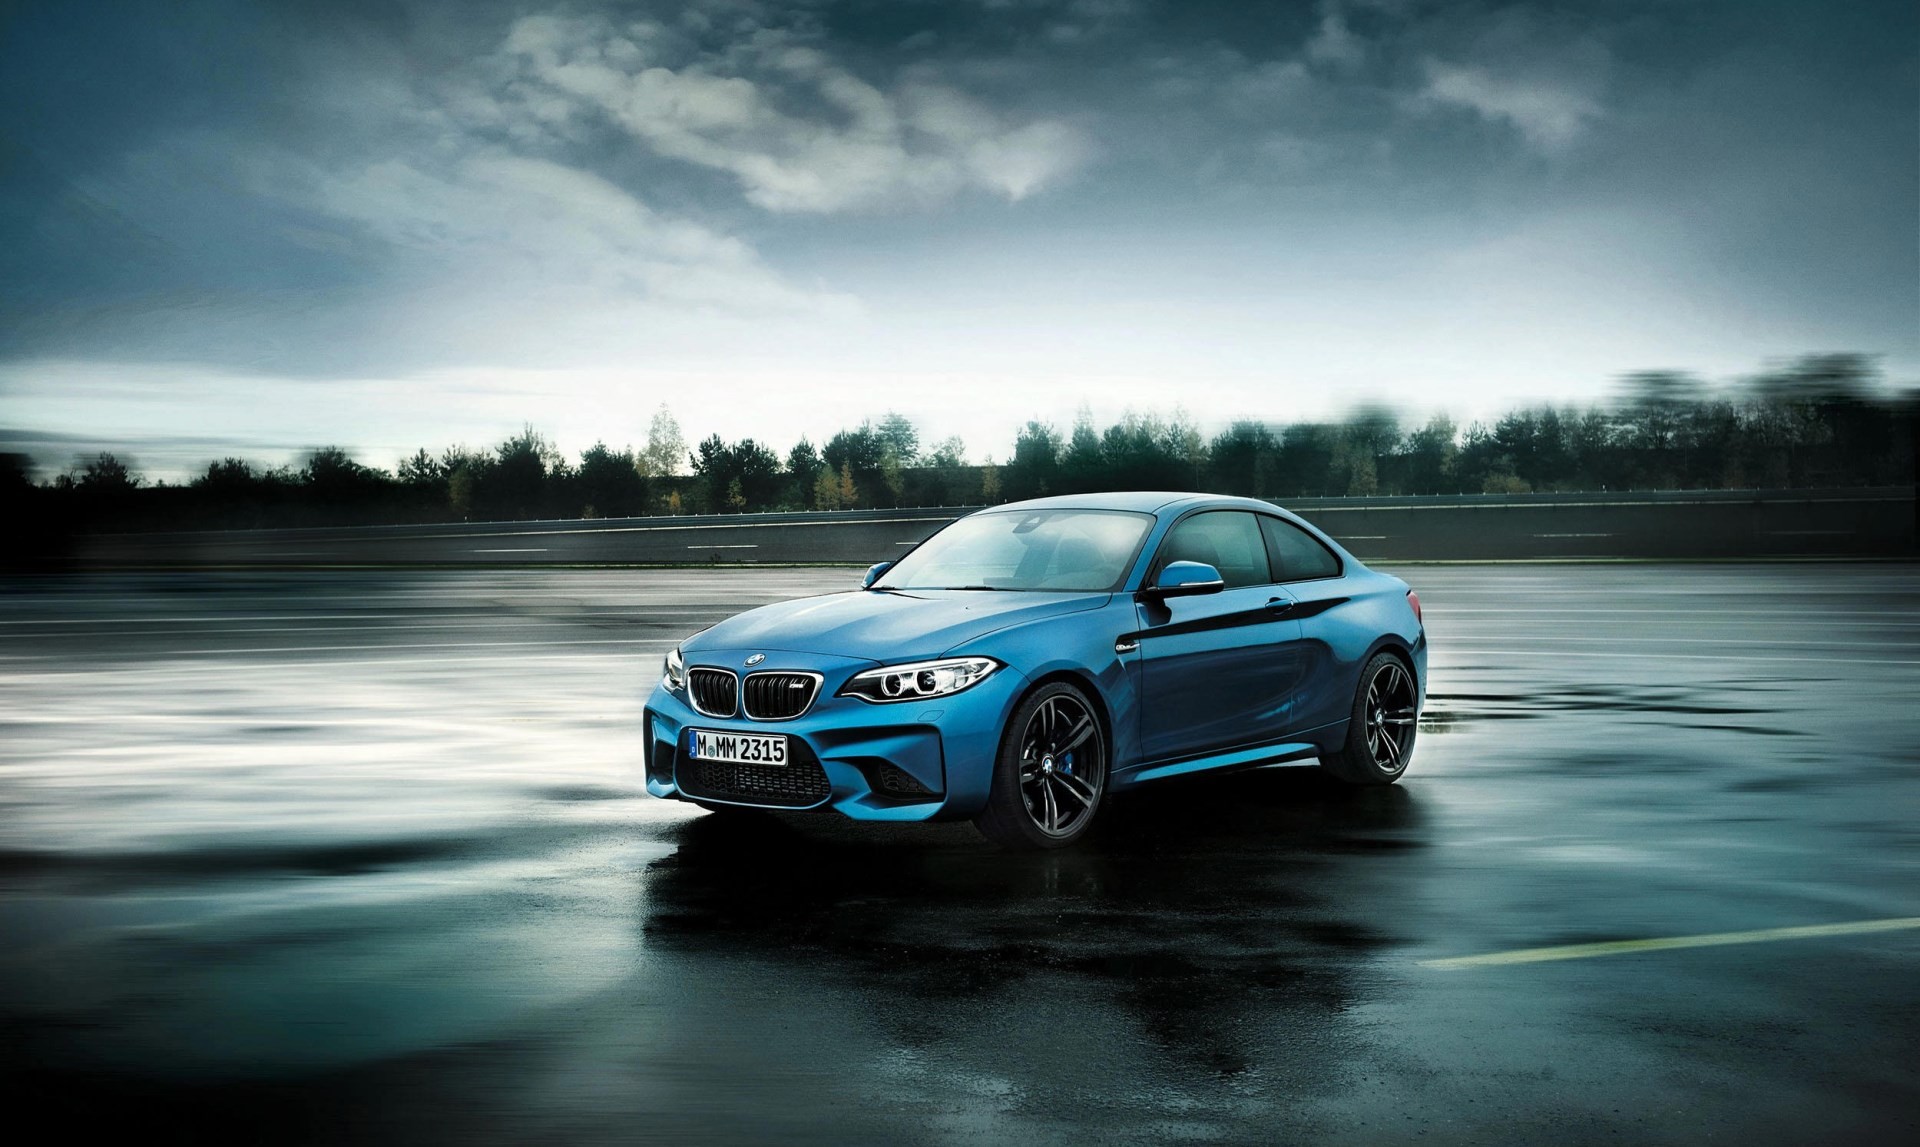 BMW M2 HD Car Wallpapers   Large HD Wallpapers